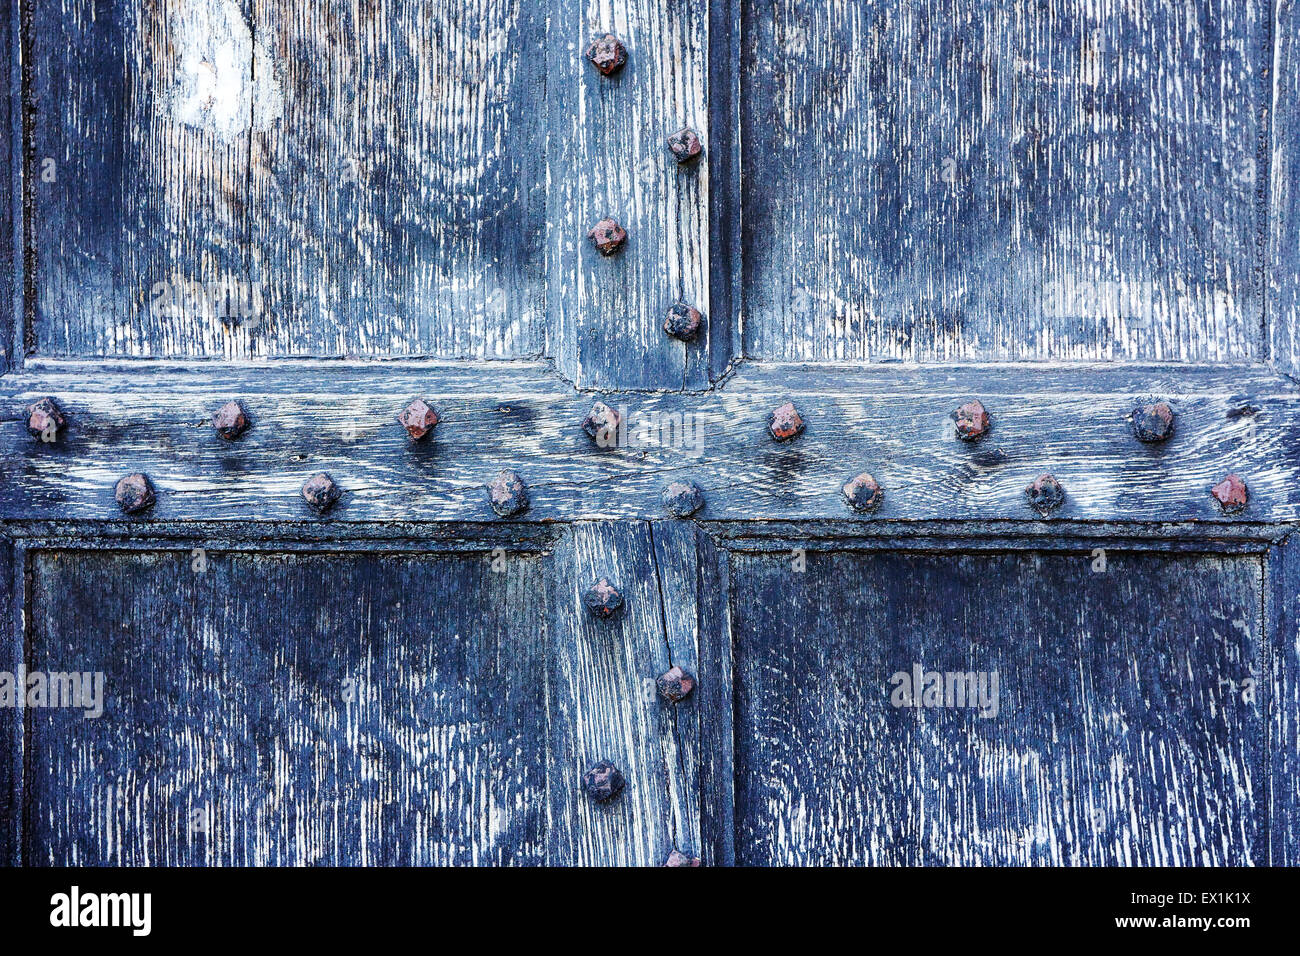 Close up view of a section of an old worn wooden studded door. Stock Photo